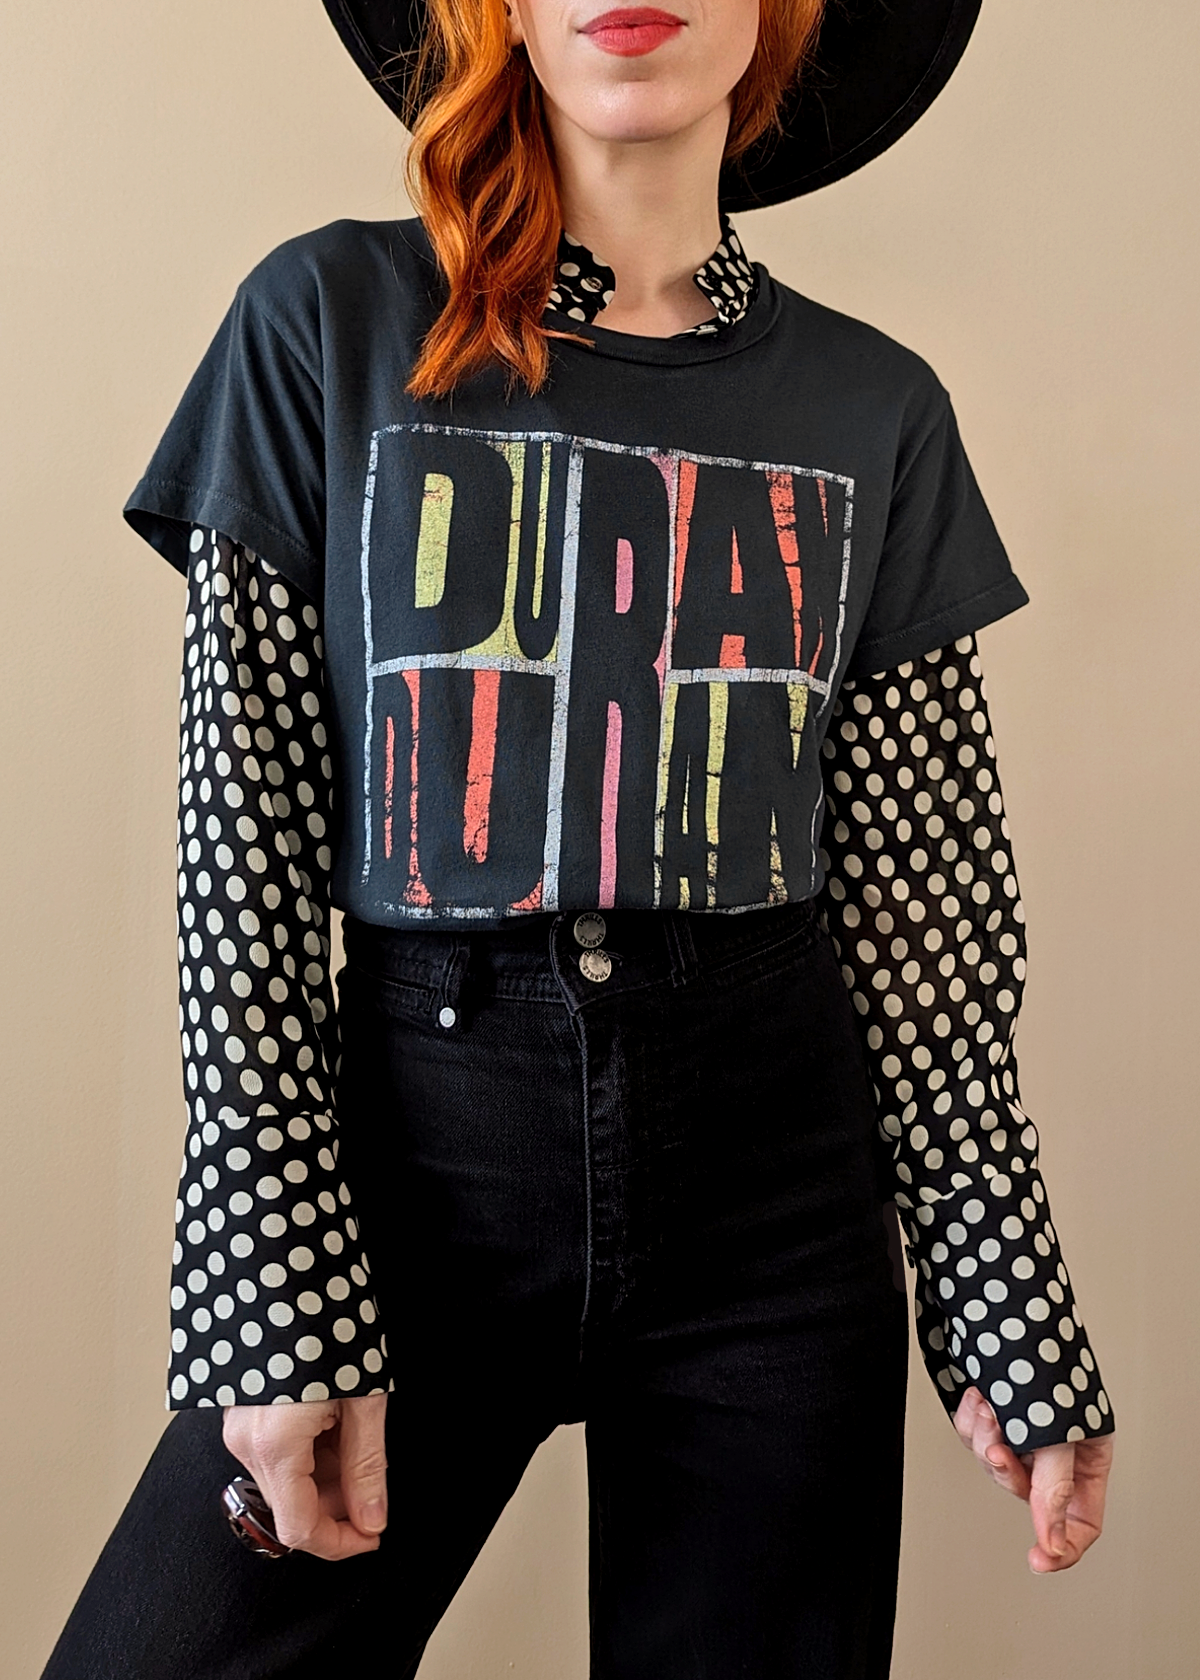 Duran Duran Big Thing Abstract Idealist Romantic Tee by Daydreamer LA Made in USA officially licensed 